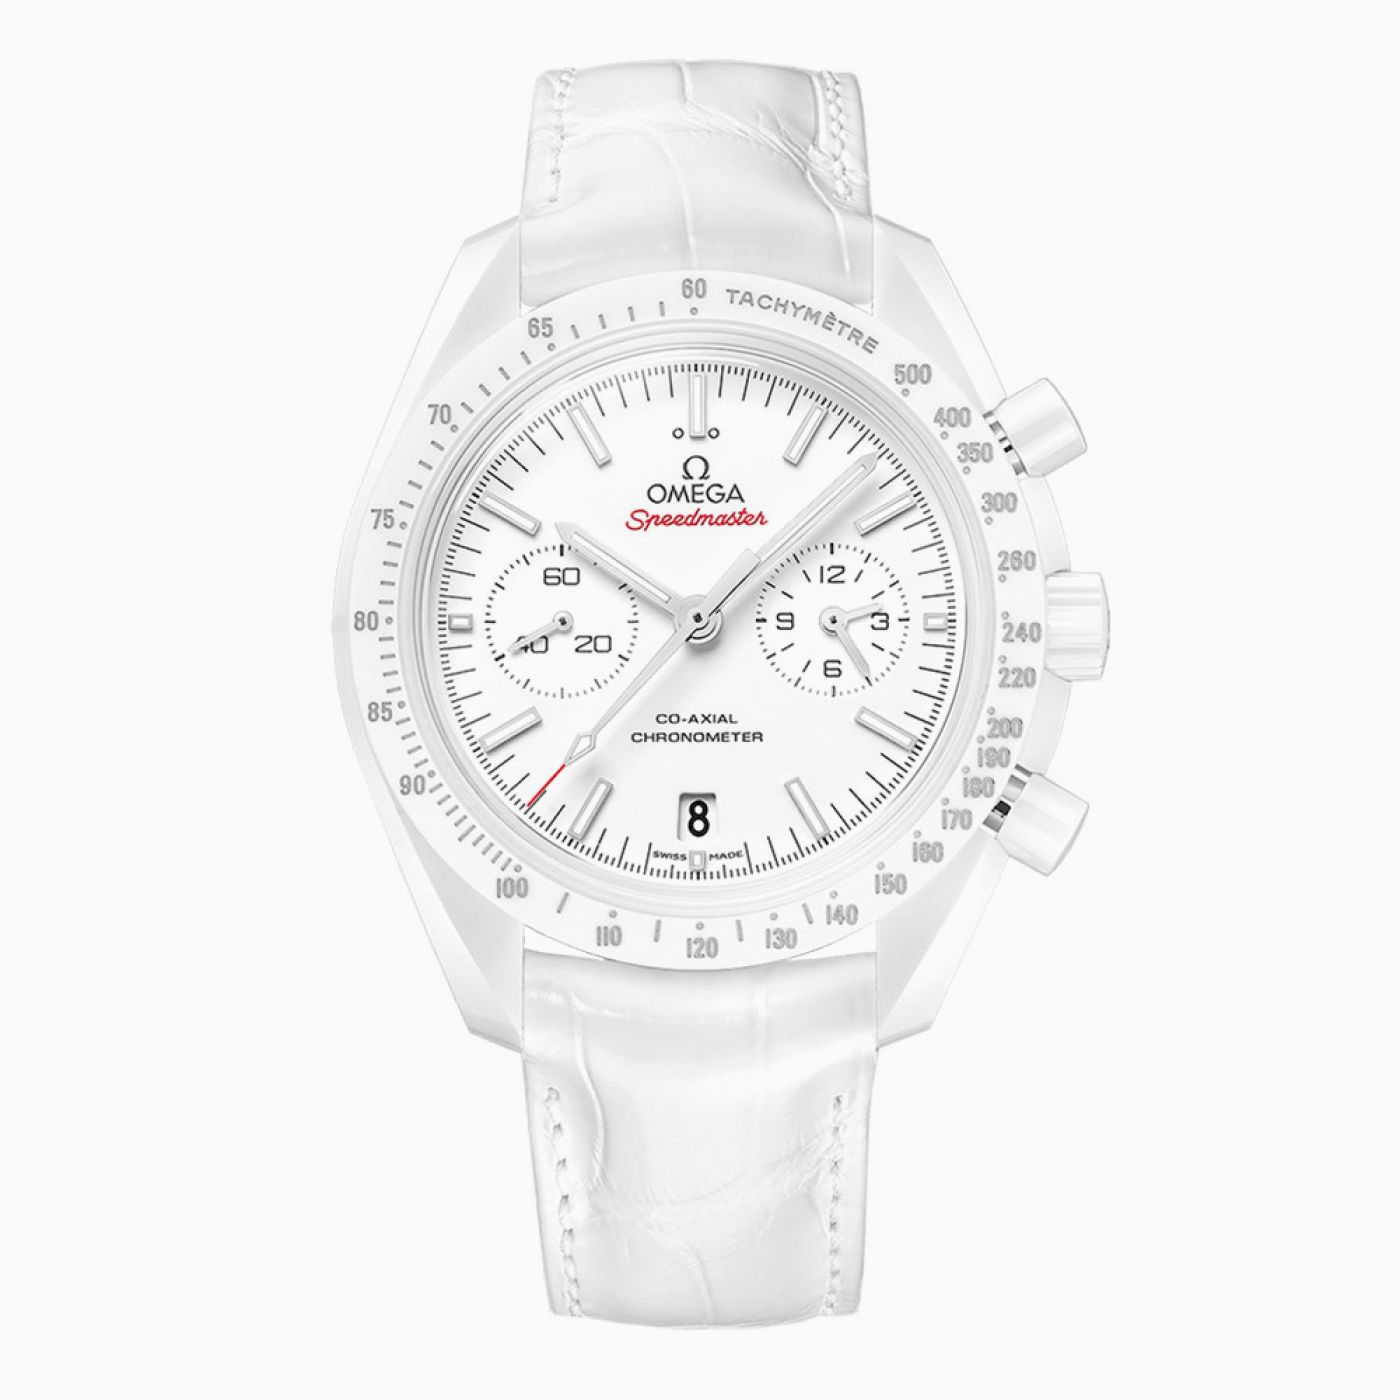 Omega Speedmaster Moonwatch Professional Chronograph White Side of the Moon